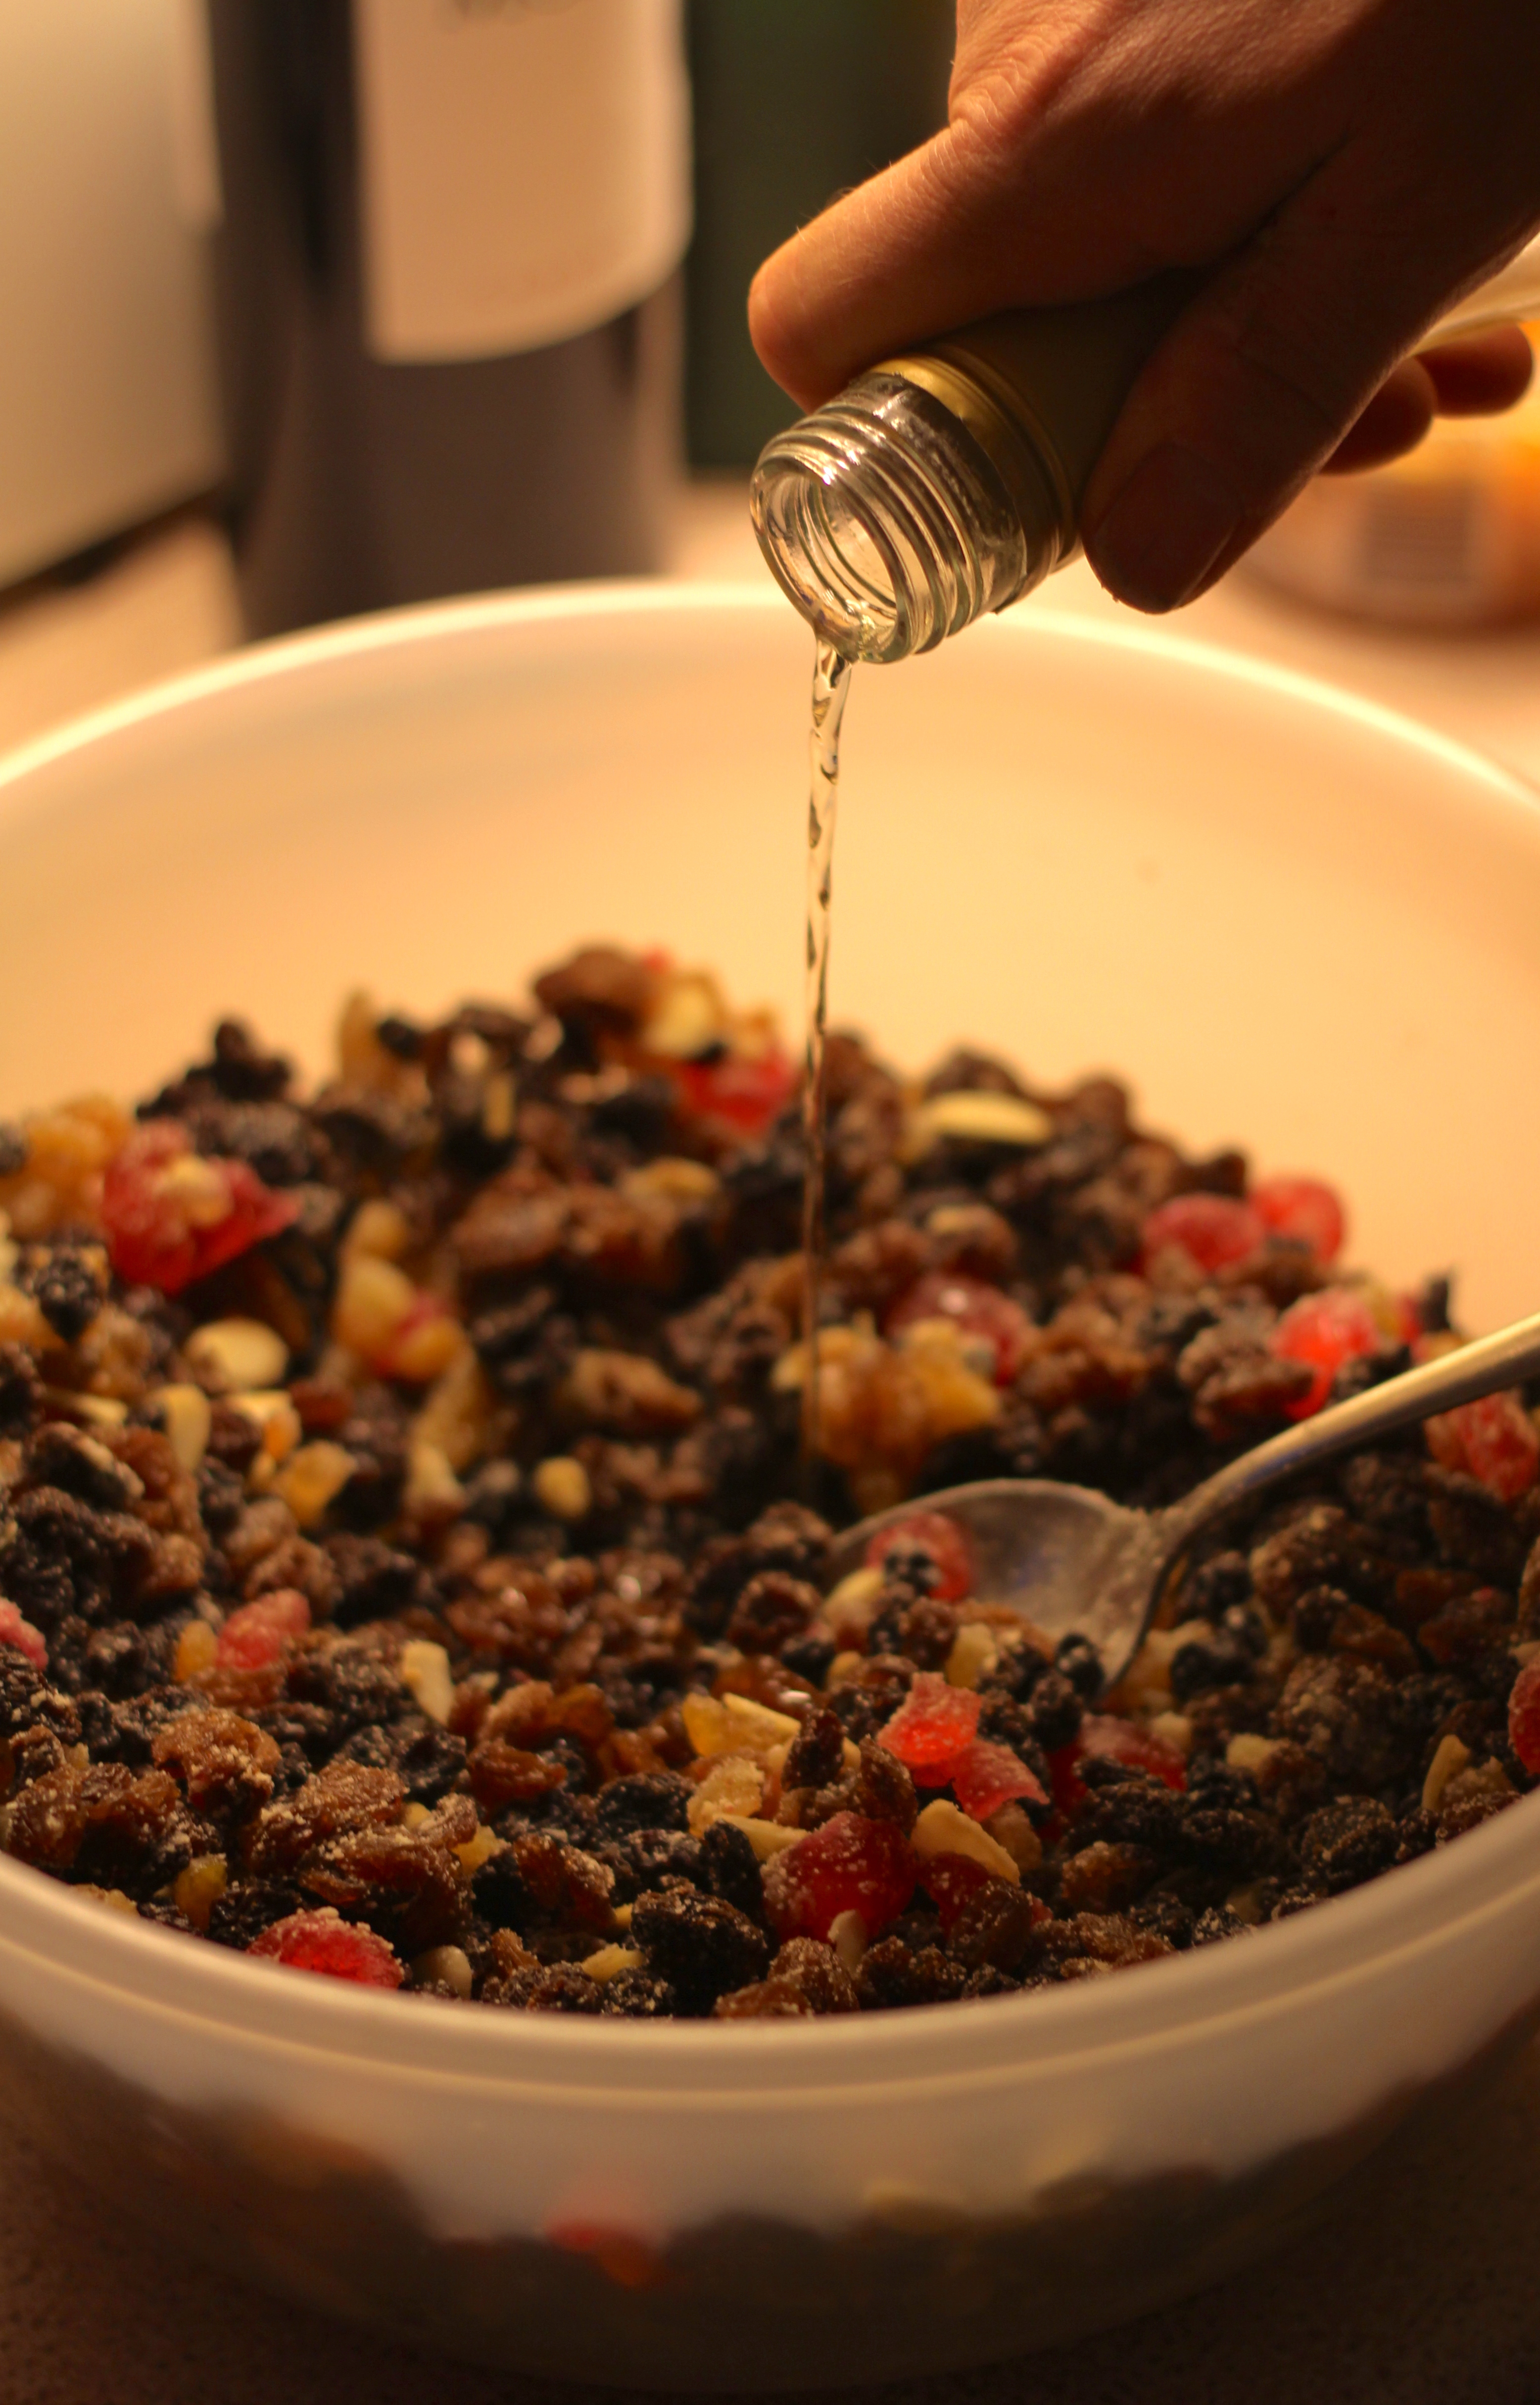 A bottle of brandy is poured into a mixture-bowl filled with fruit.